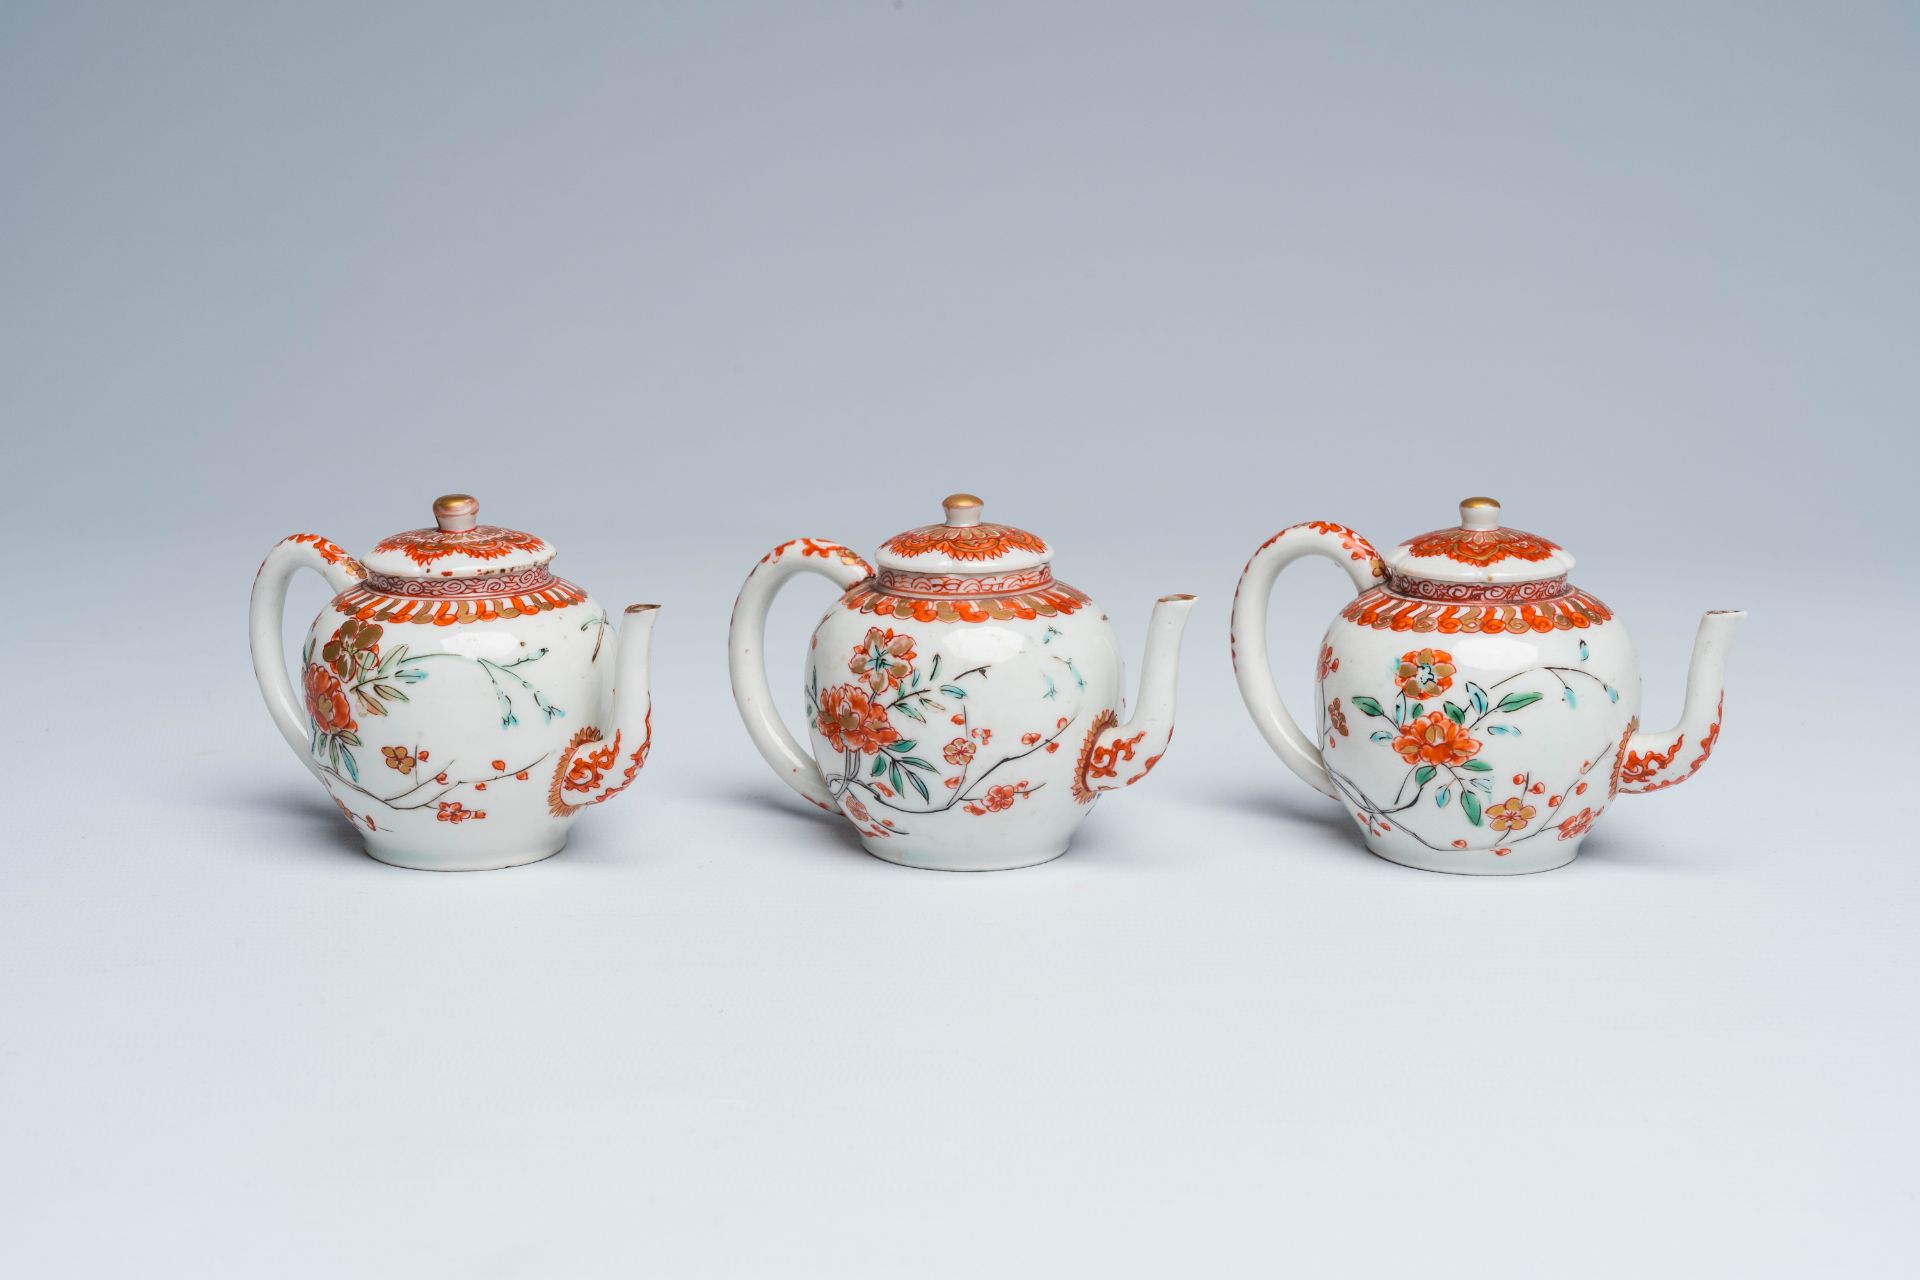 Three Japanese Kakiemon style teapots and covers with floral design, Edo, late 17th C.